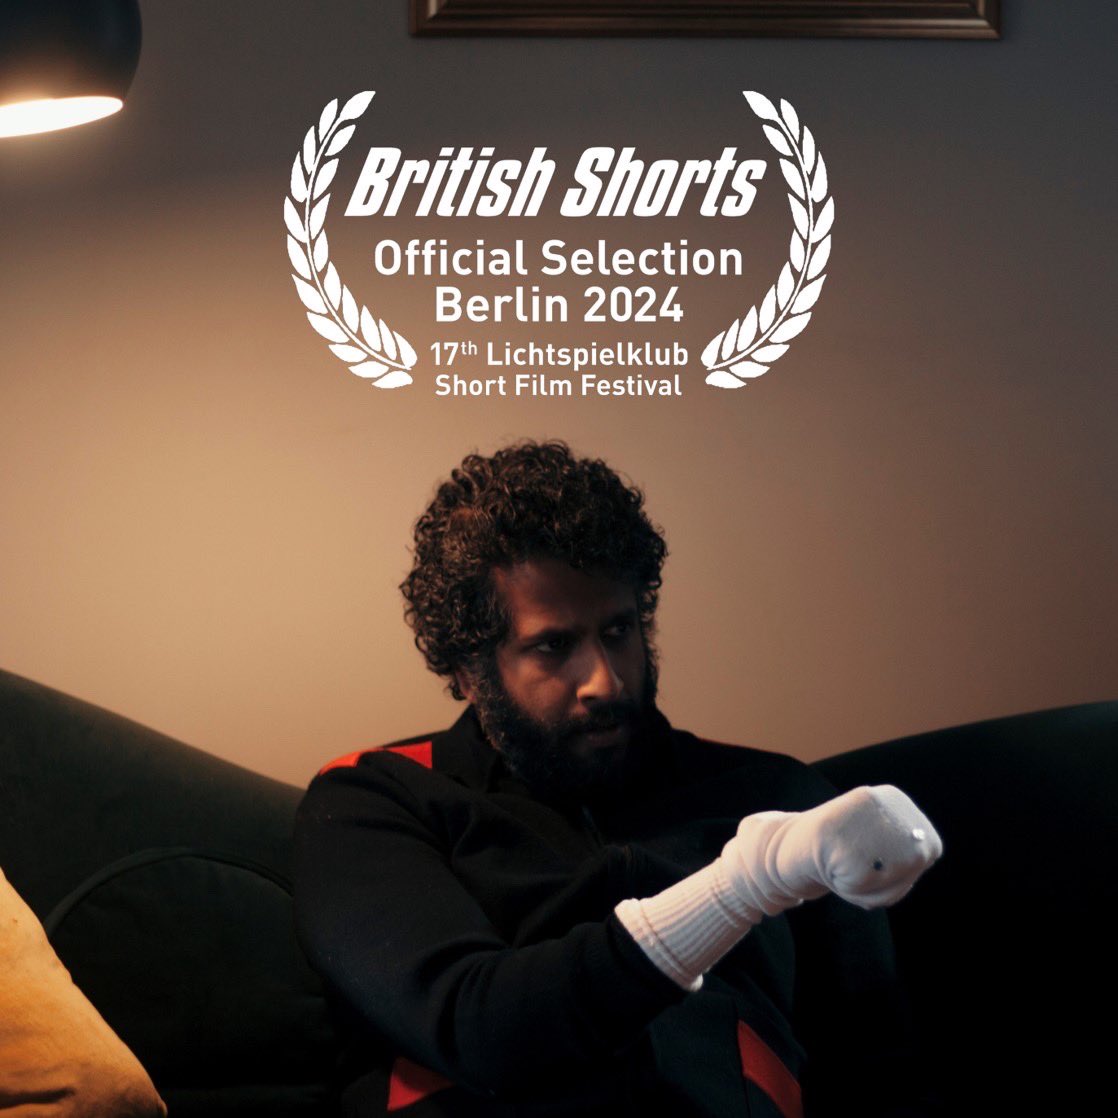 Happy New Year! In our first selection of 2024, @MalcolmSockFilm heads to @BritishShorts on January 21st! 🇩🇪🎞️